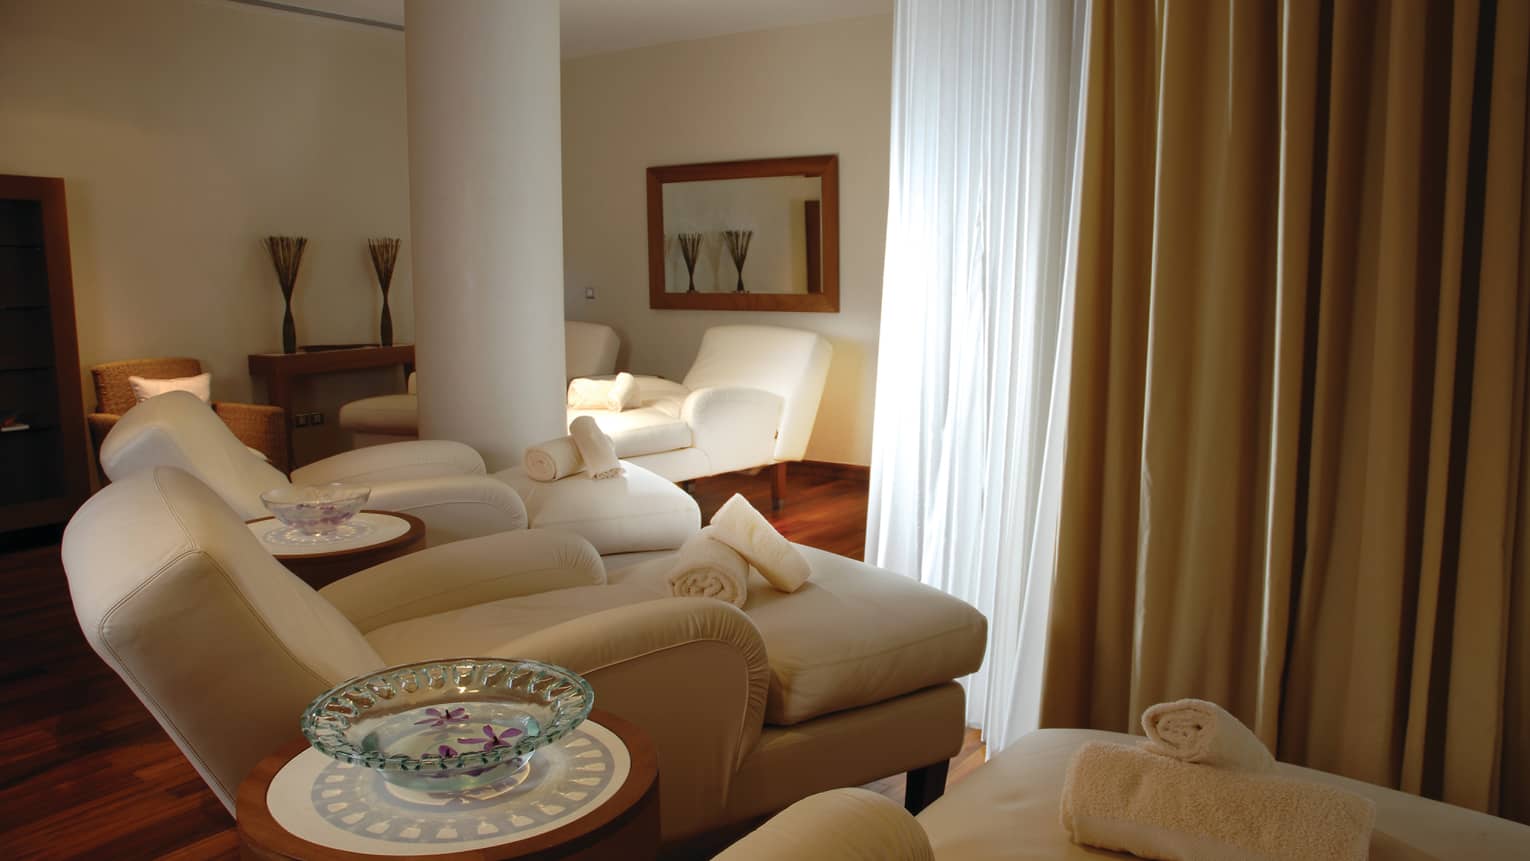 Three large plush chaise lounge sofas in dimly-lit spa room, rolled white towels